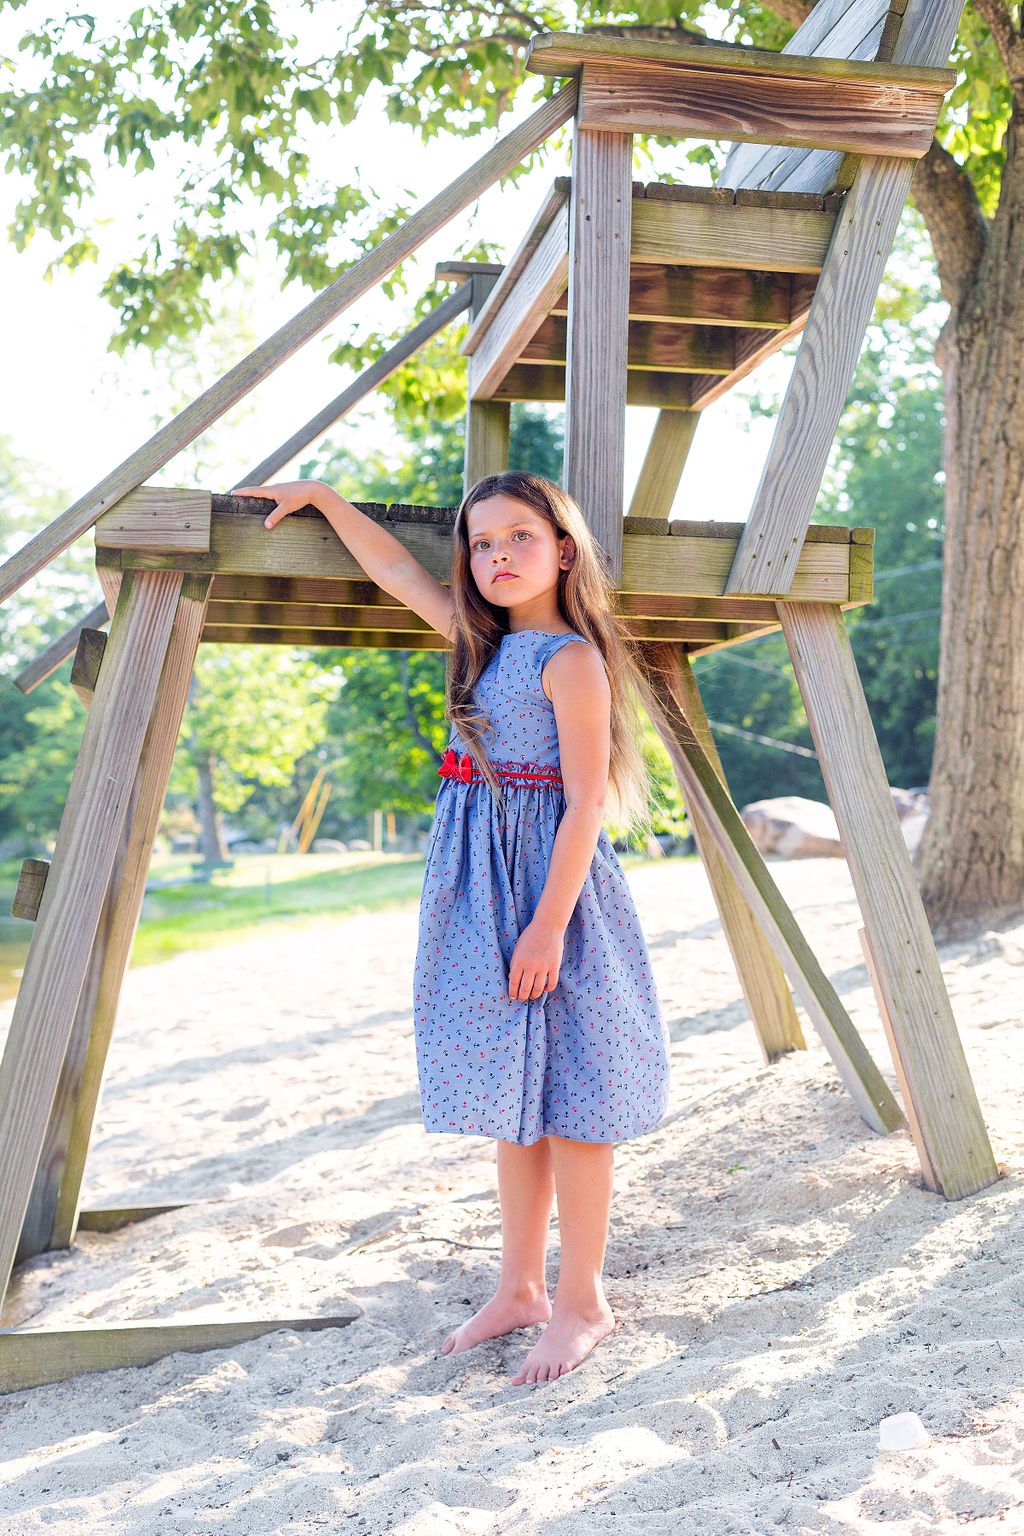 Dress - Anchor Print Cotton Dress With Bow